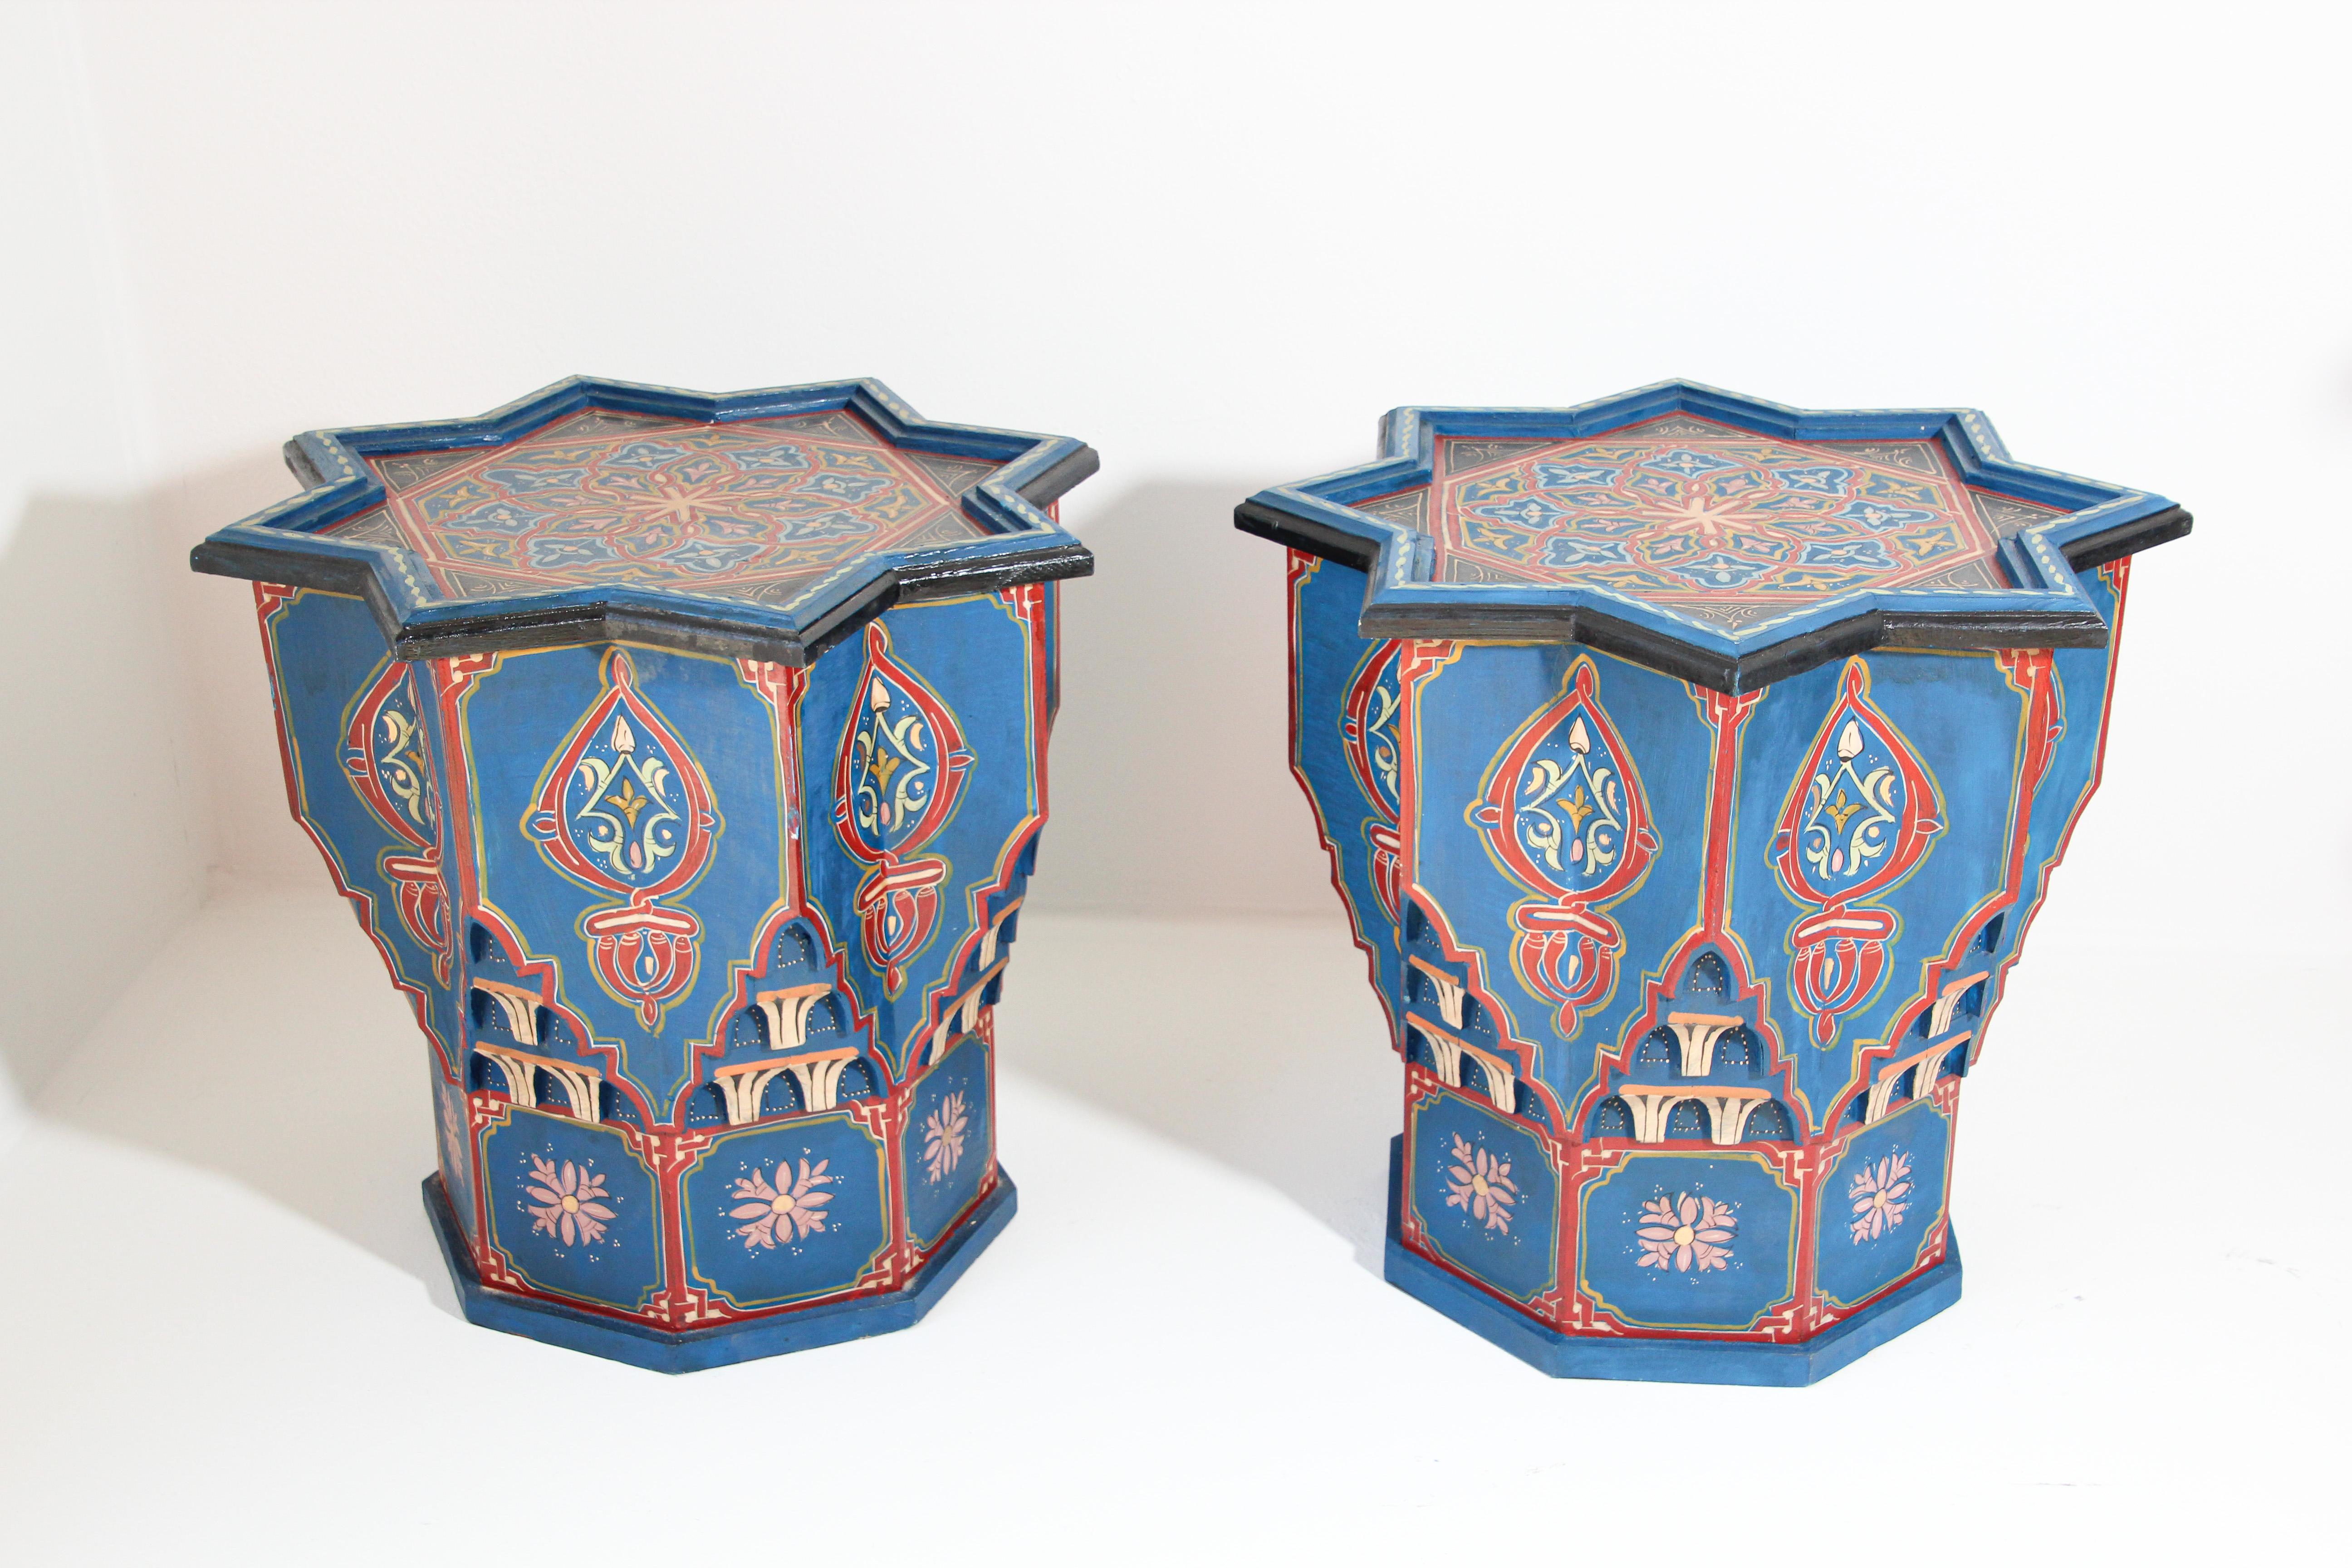 Pair of Moroccan colorful blue hand painted and carved side occasional table with Moorish Islamic designs.
Vintage Moroccan side tables in royal blue background with multicolored floral and geometric designs.
Very decorative fine artwork on a star